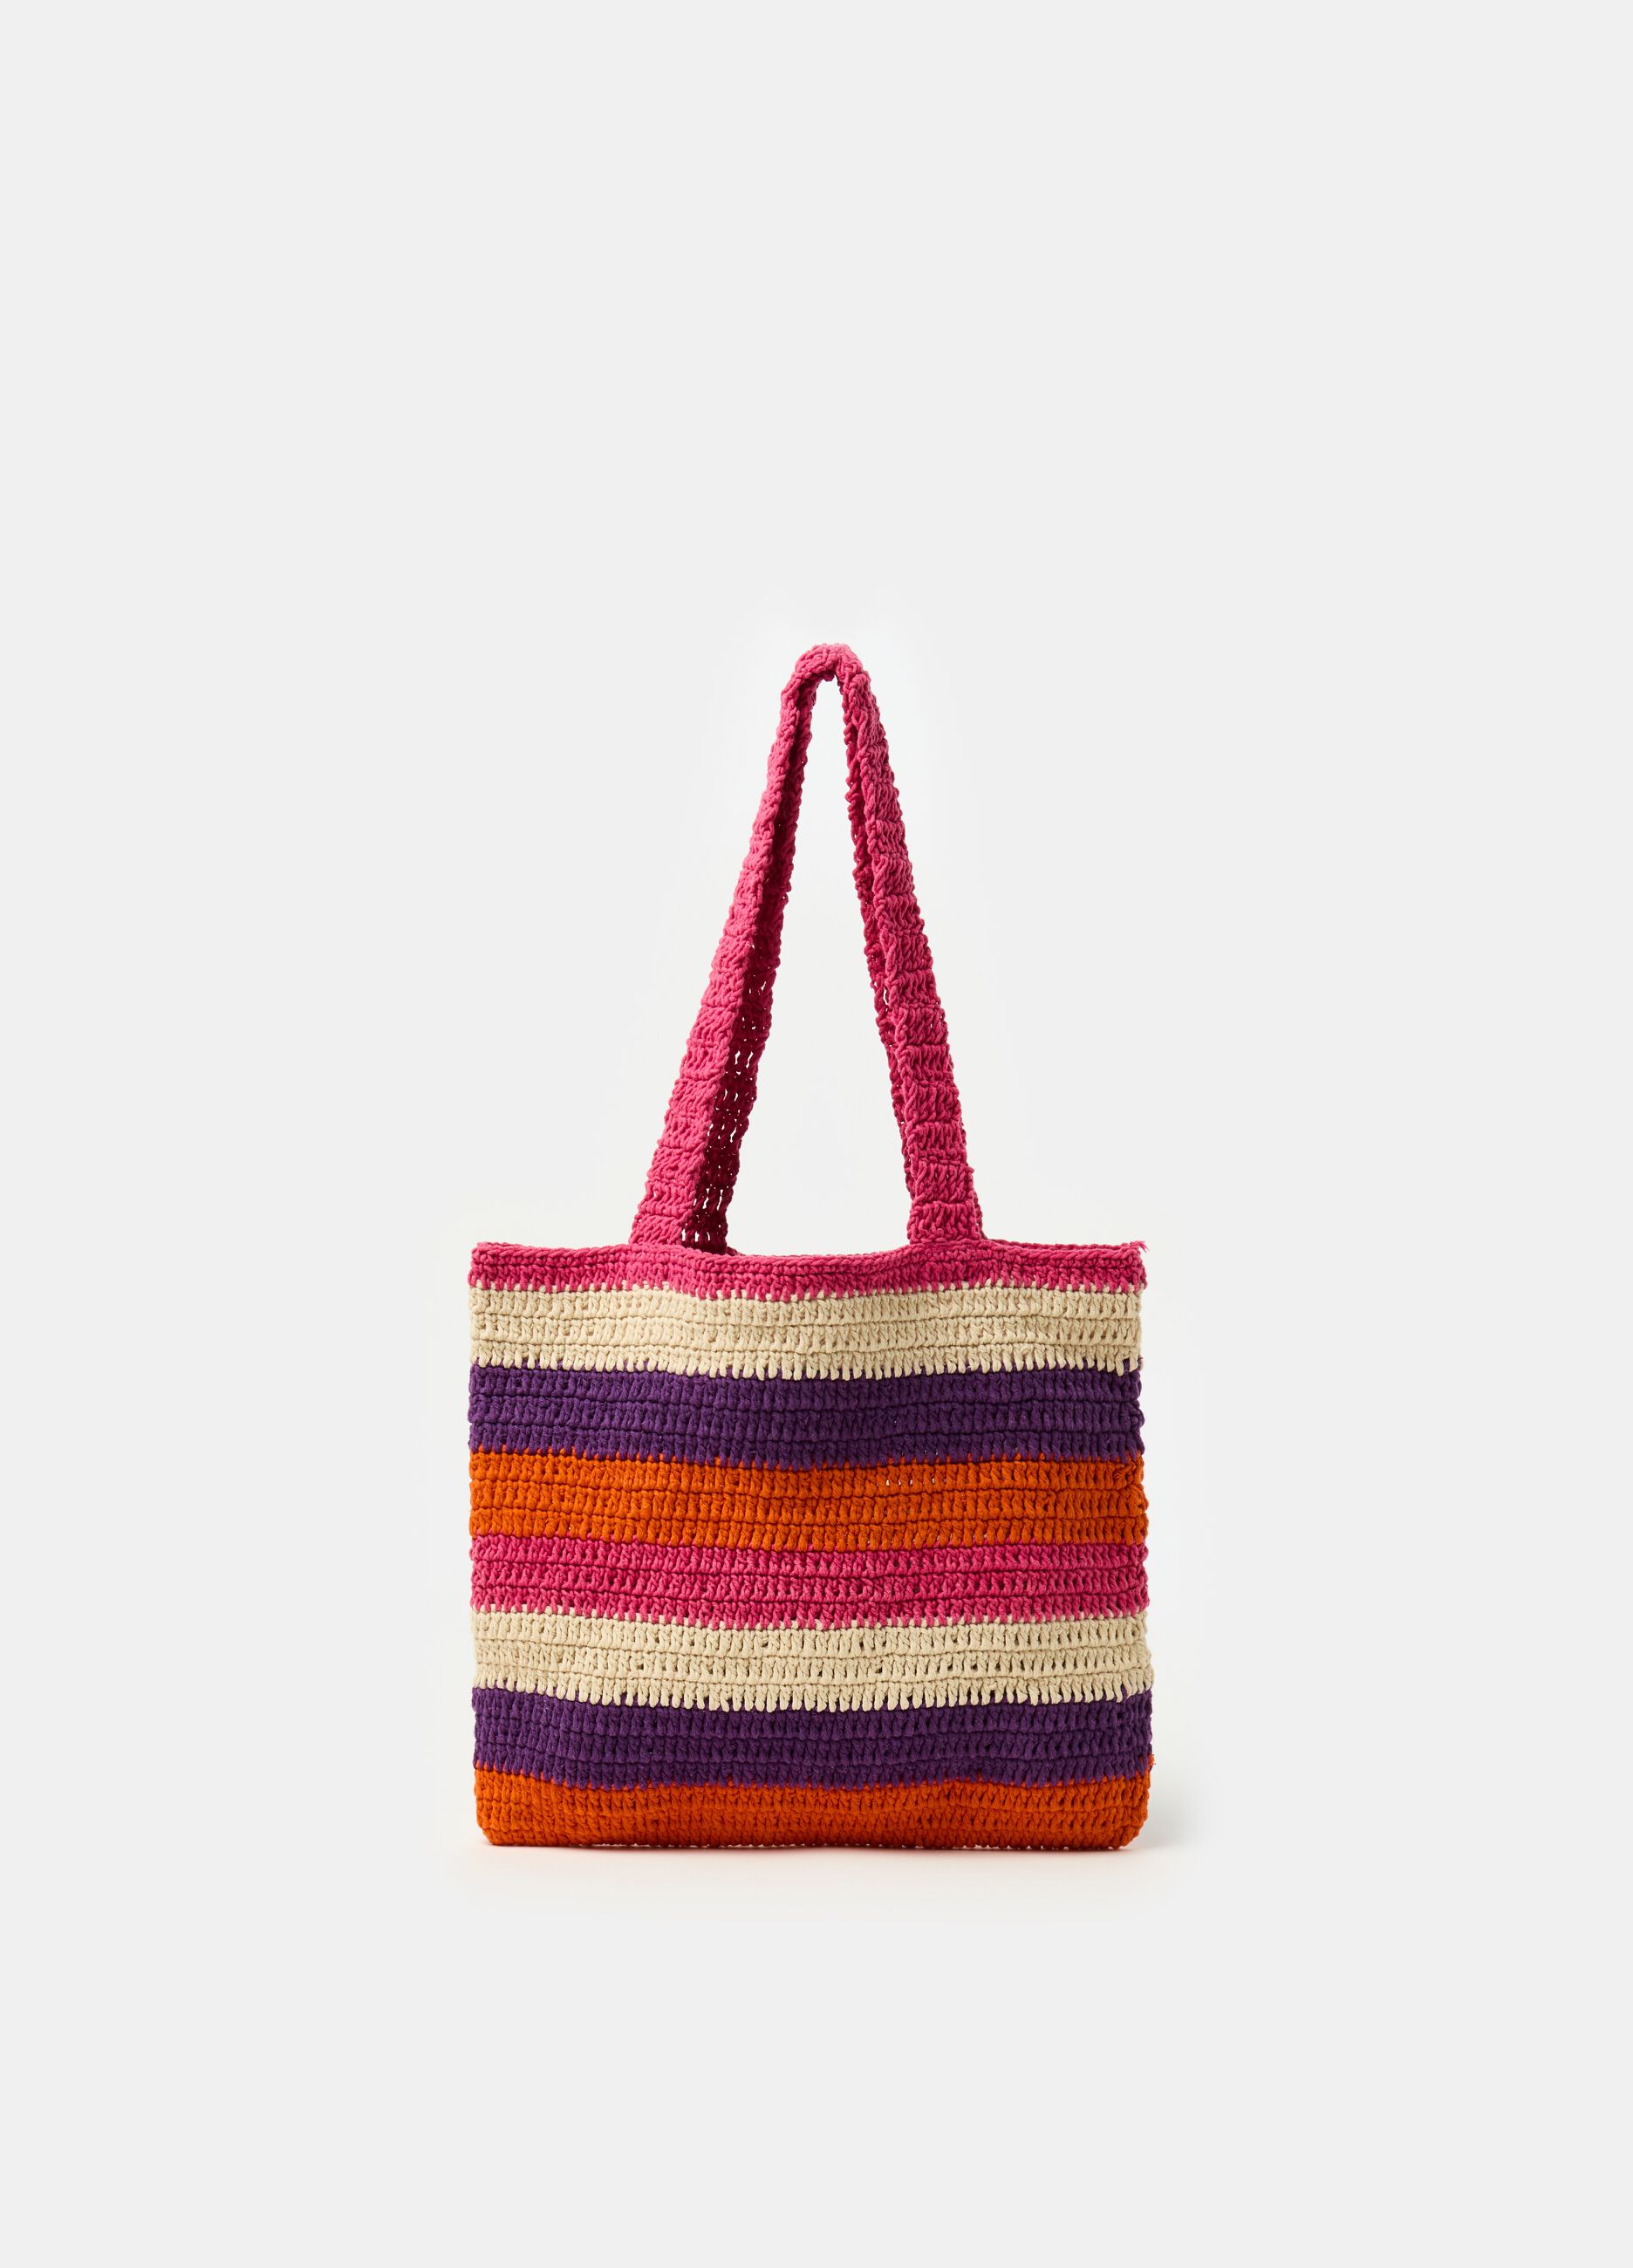 Bag with striped crochet design